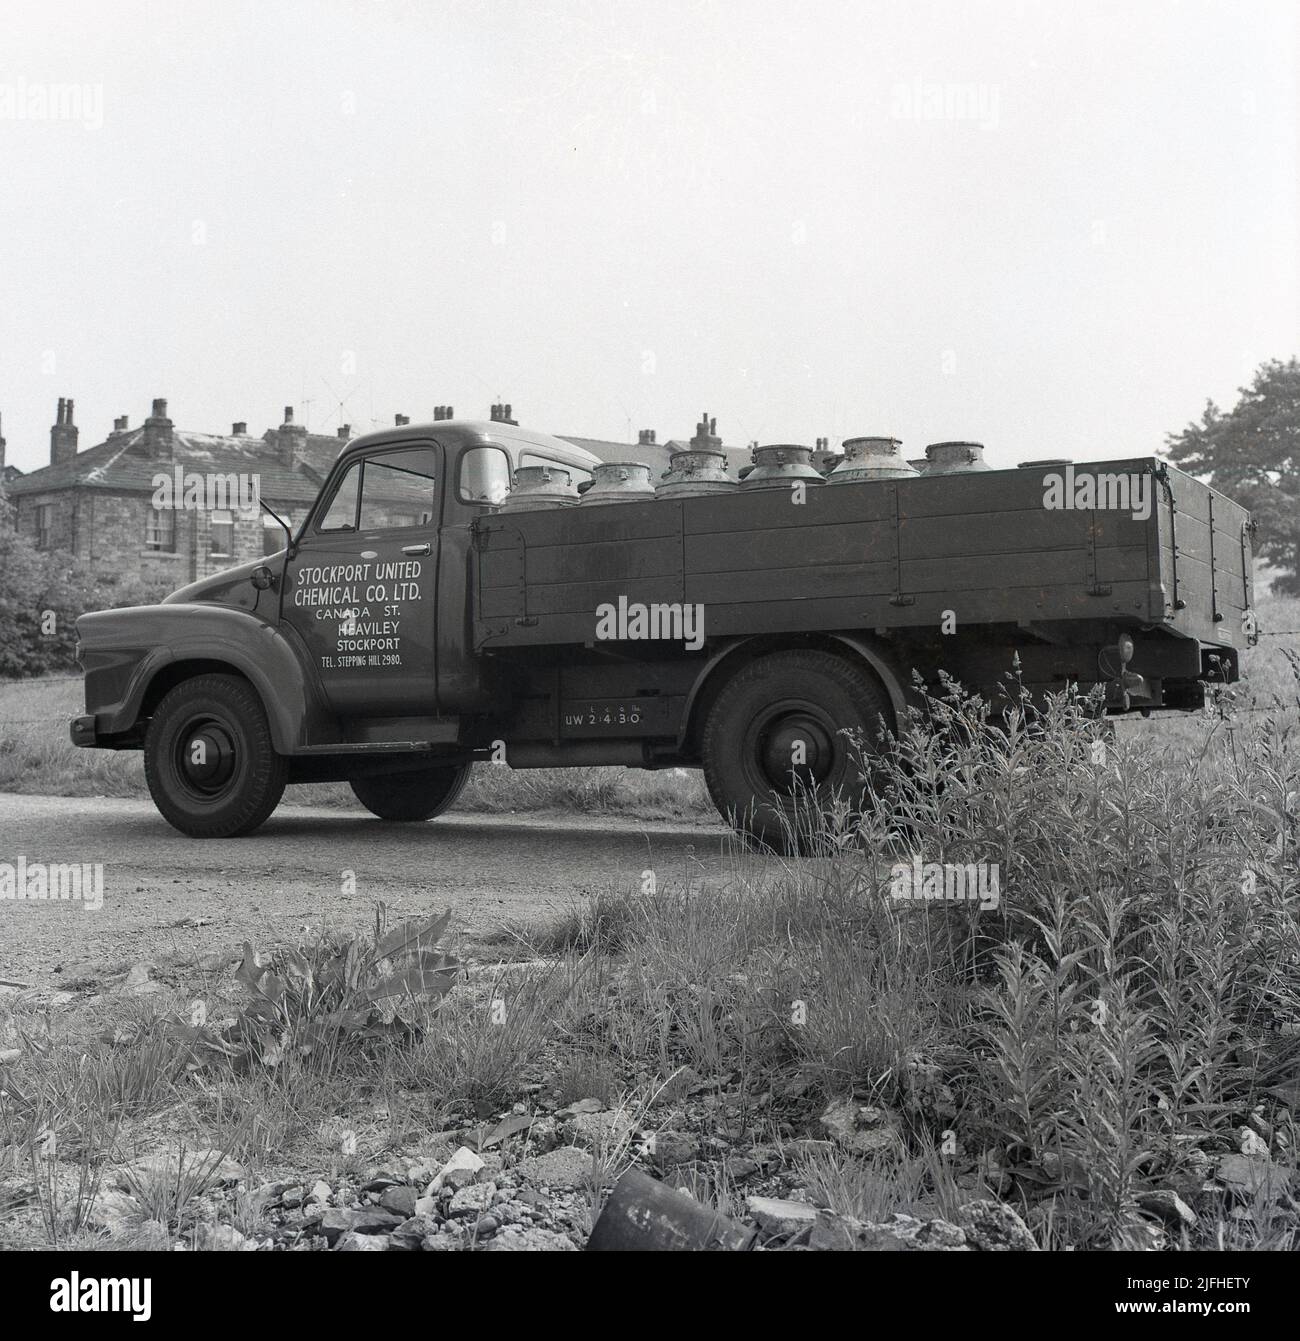 1950s, historical, side view of a Bedford TJ delivery truck of the Stockport United Chemical Company of Canada St, Heaviley, Stockport, England, UK, with a load steel containers in the open rear. Stock Photo